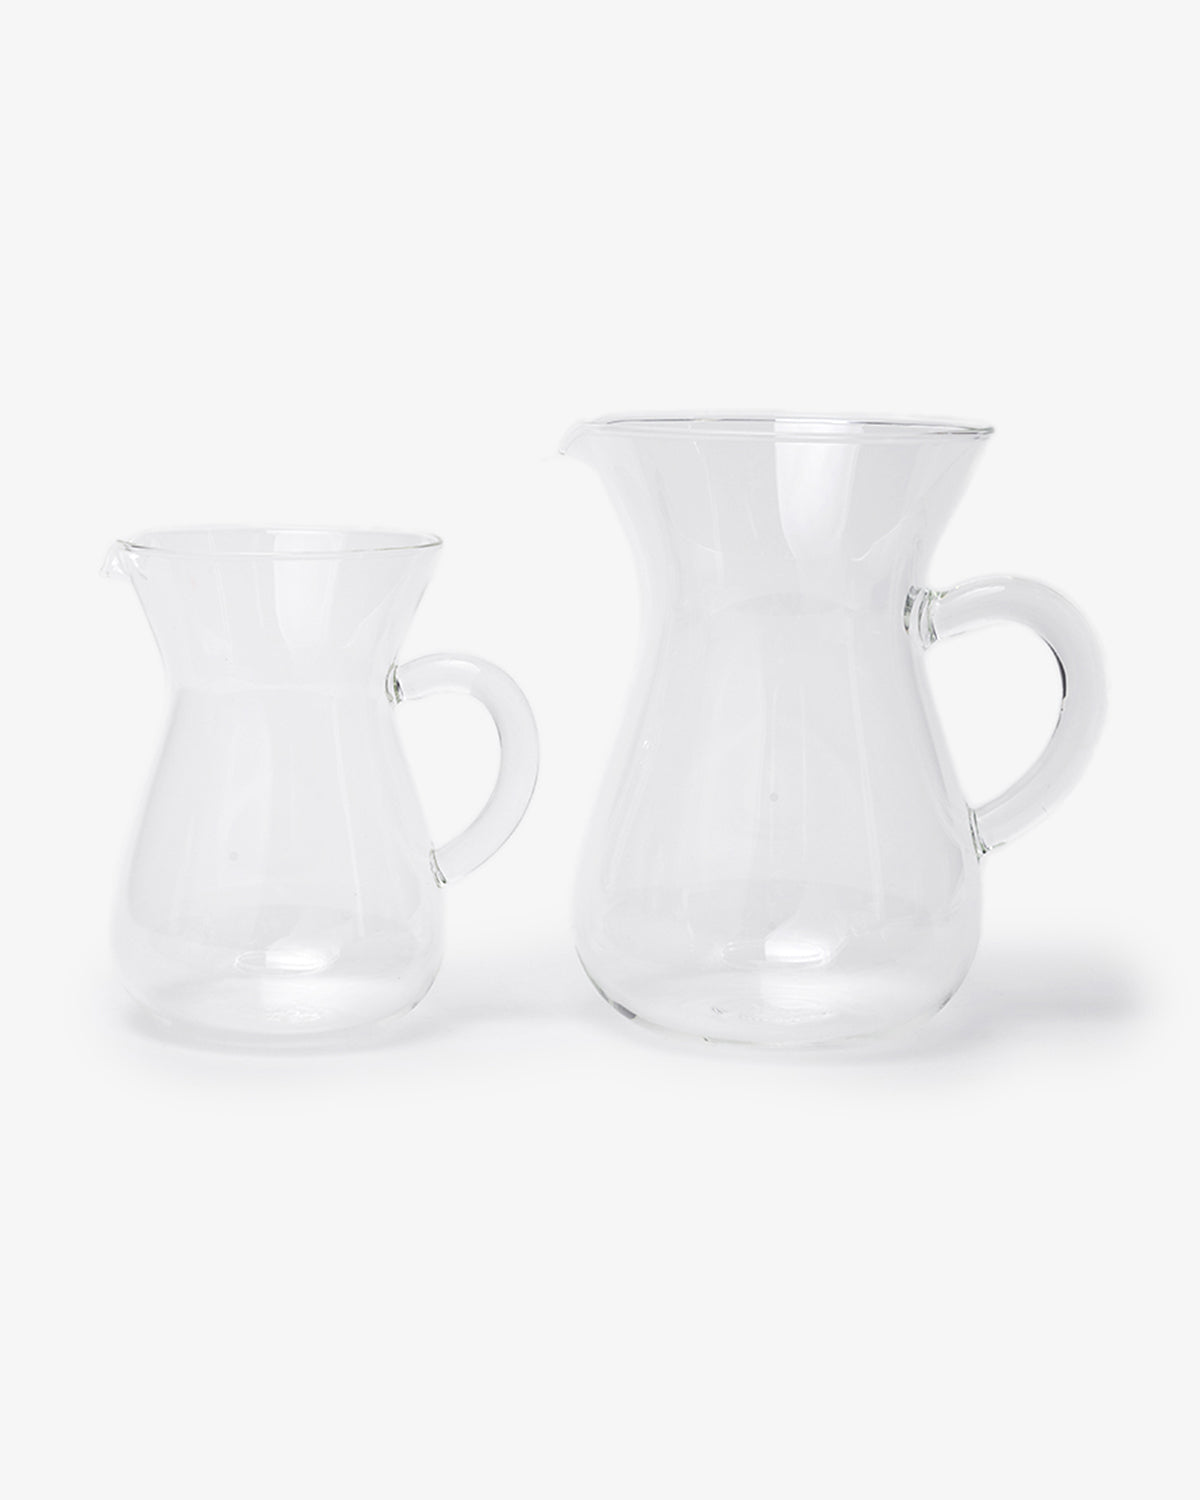 SLOW COFFEE STYLE COFFEE CARAFE SET 2CUPS